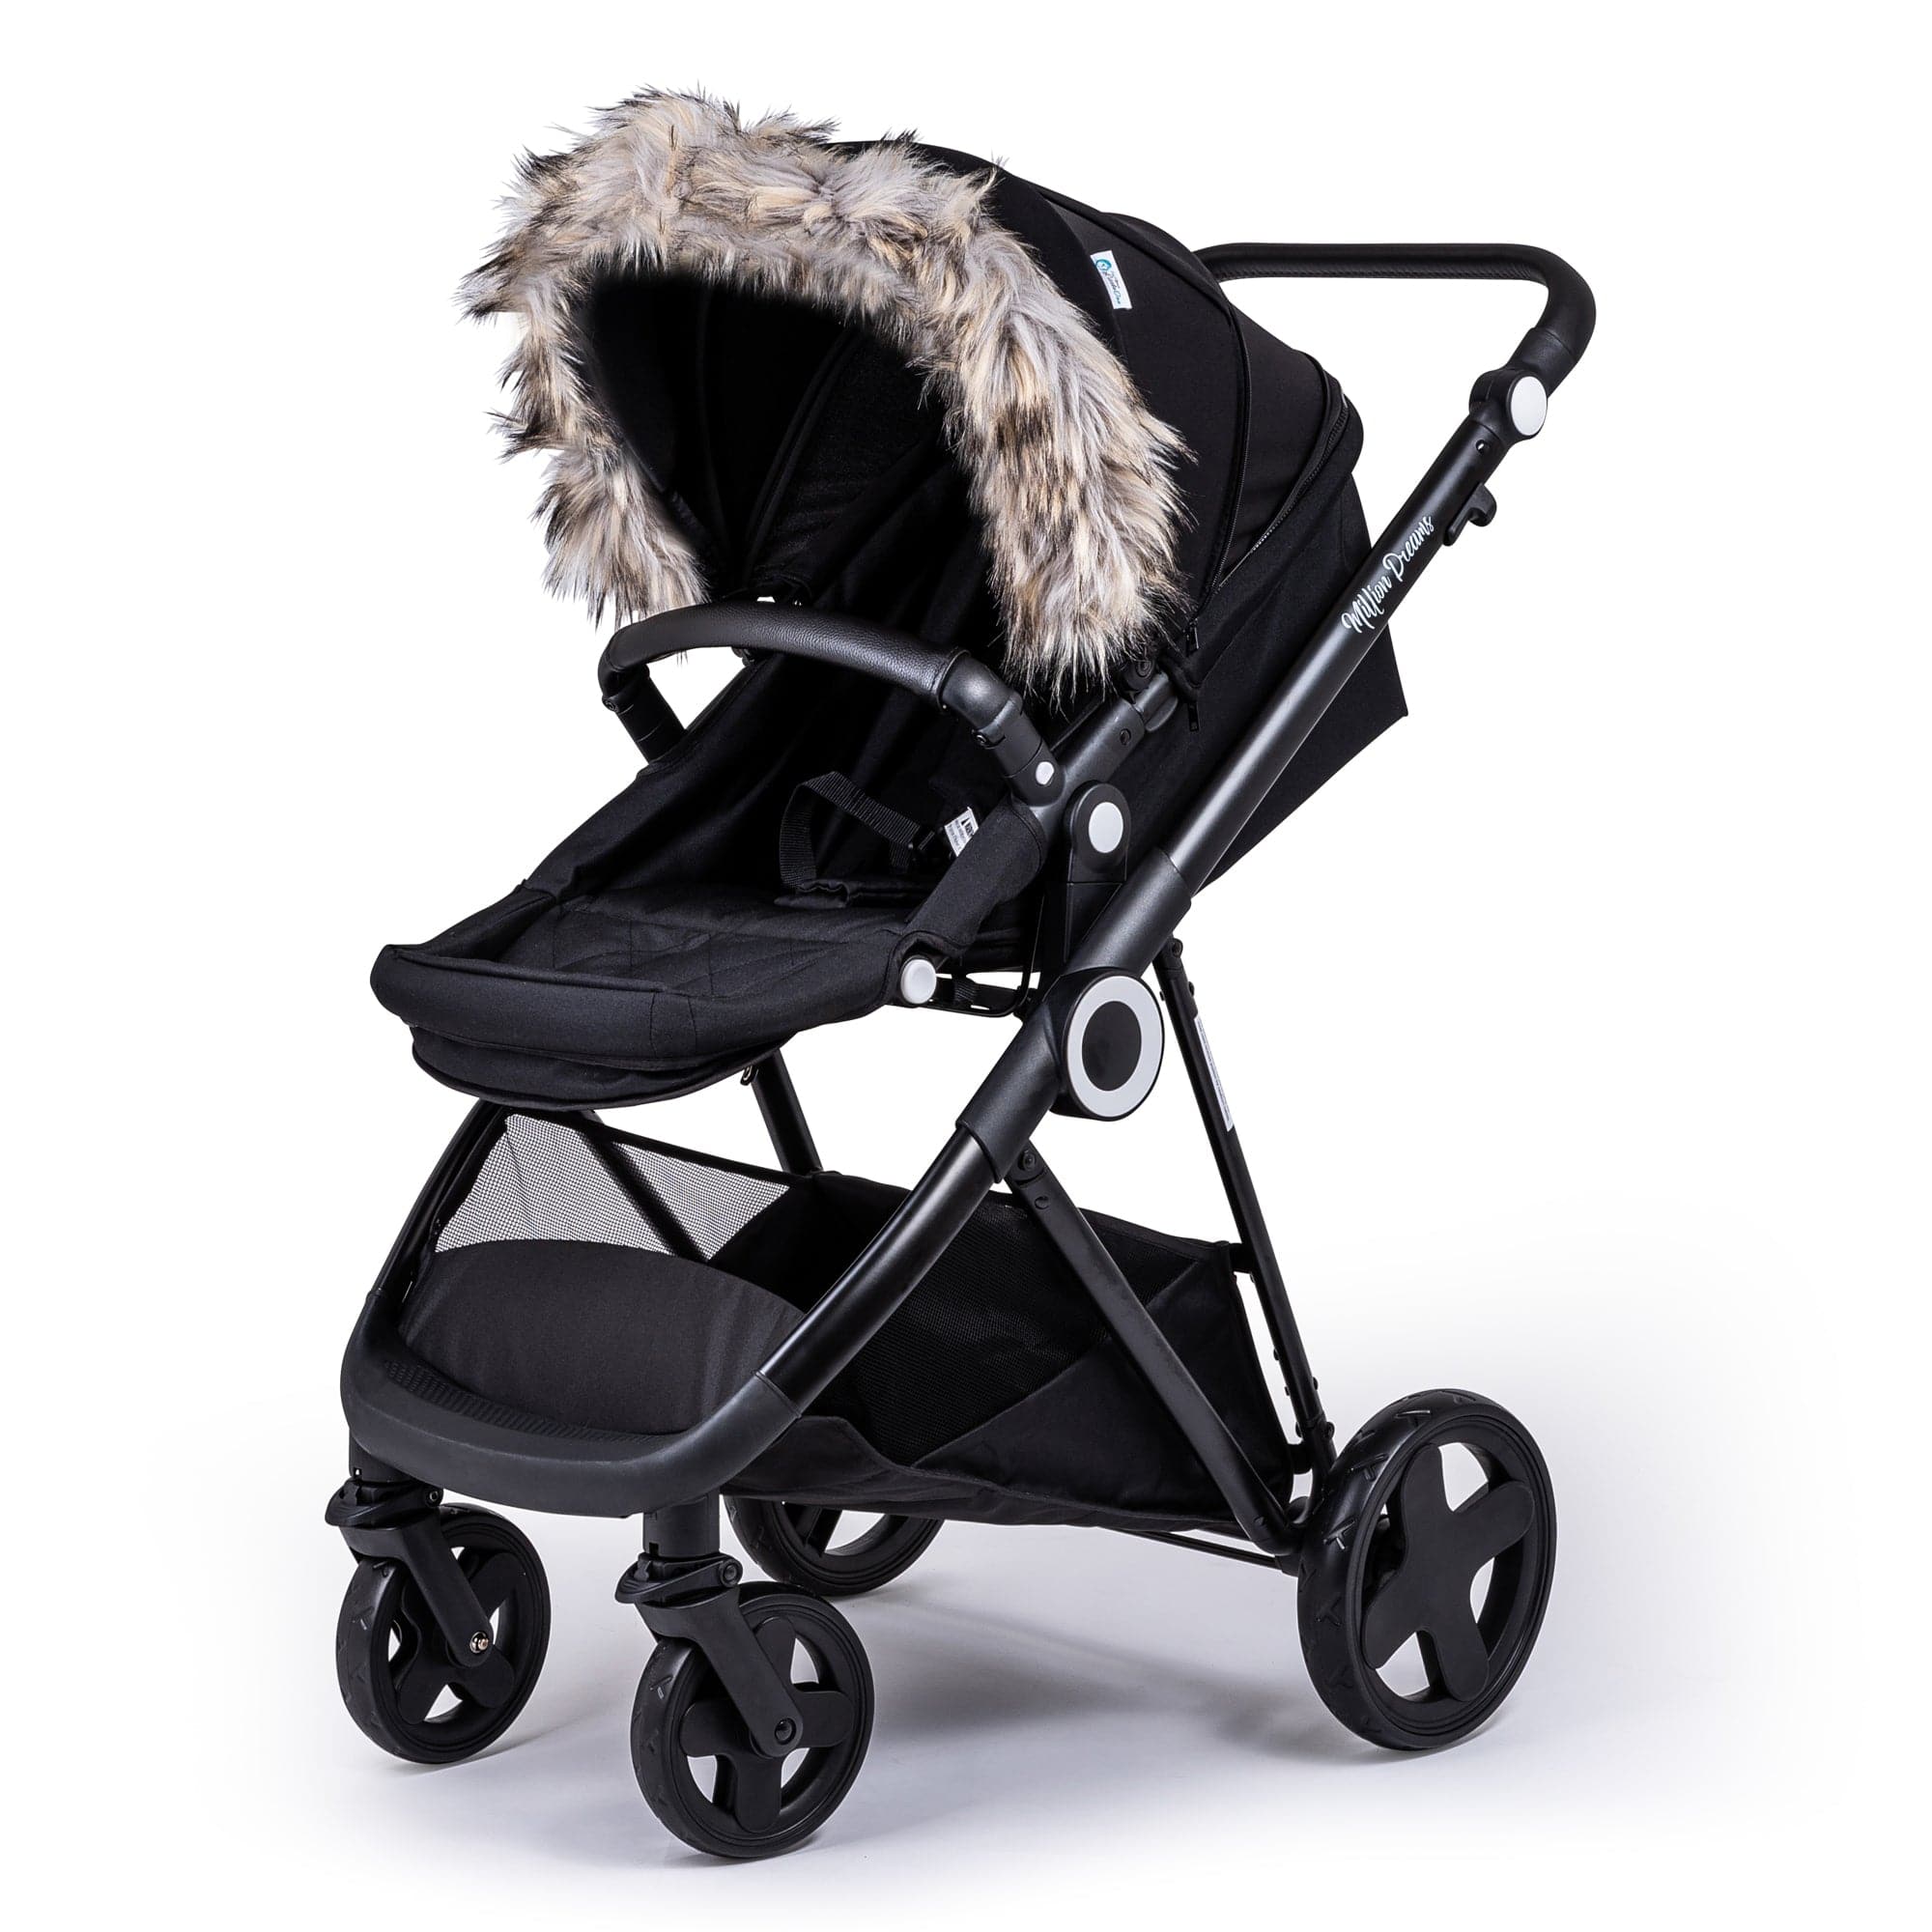 Pram Fur Hood Trim Attachment For Pushchair Compatible with Nuna - Light Grey / Fits All Models | For Your Little One